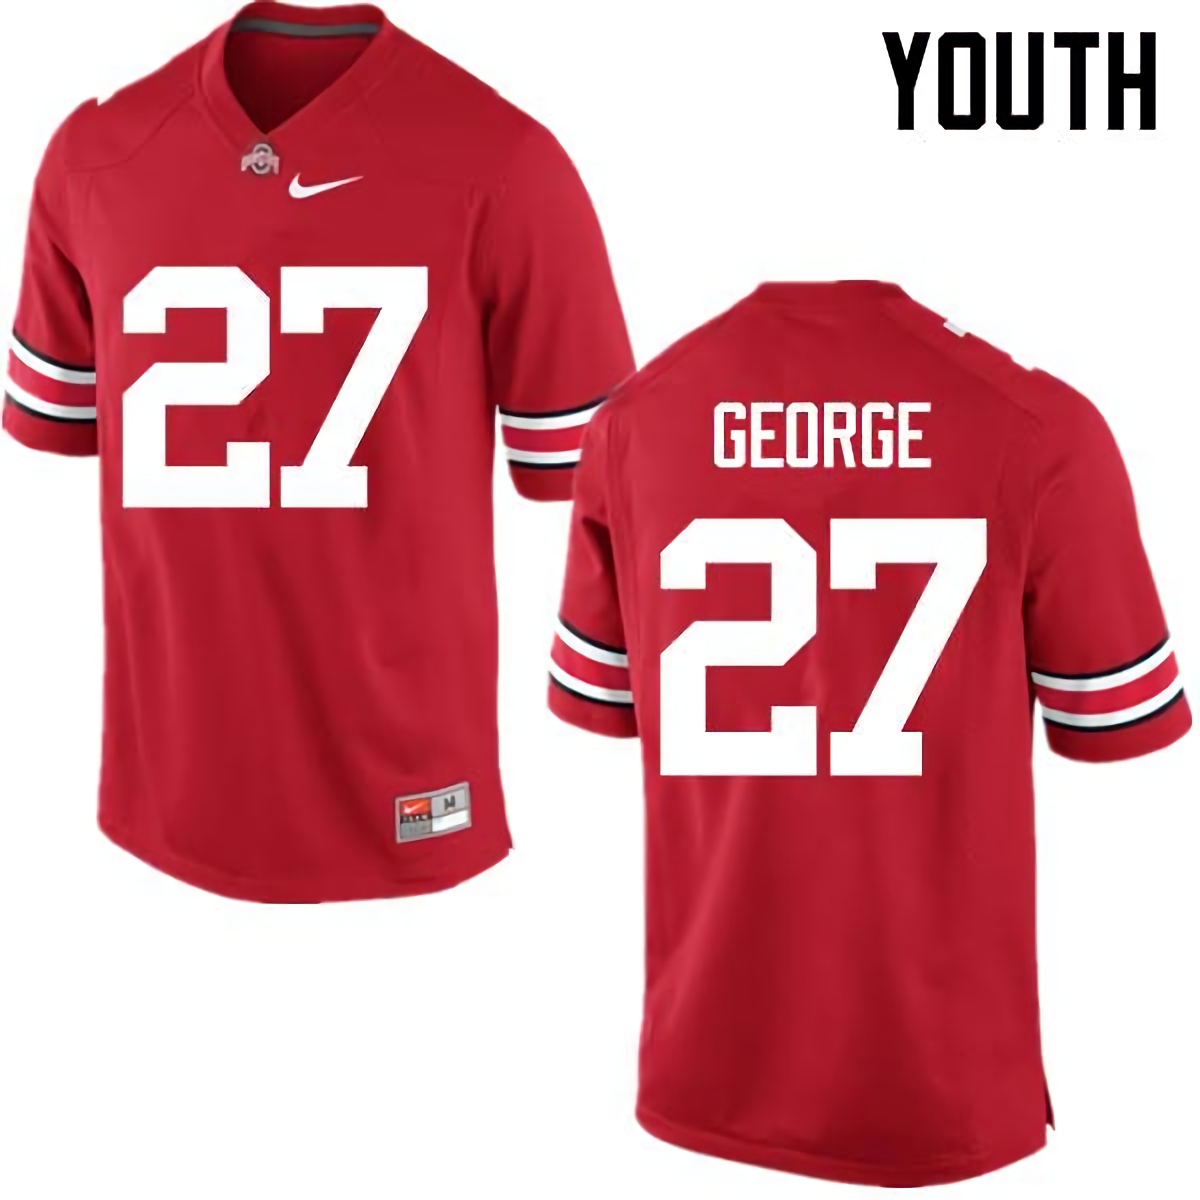 Eddie George Ohio State Buckeyes Youth NCAA #27 Nike Red College Stitched Football Jersey UGC3456LN